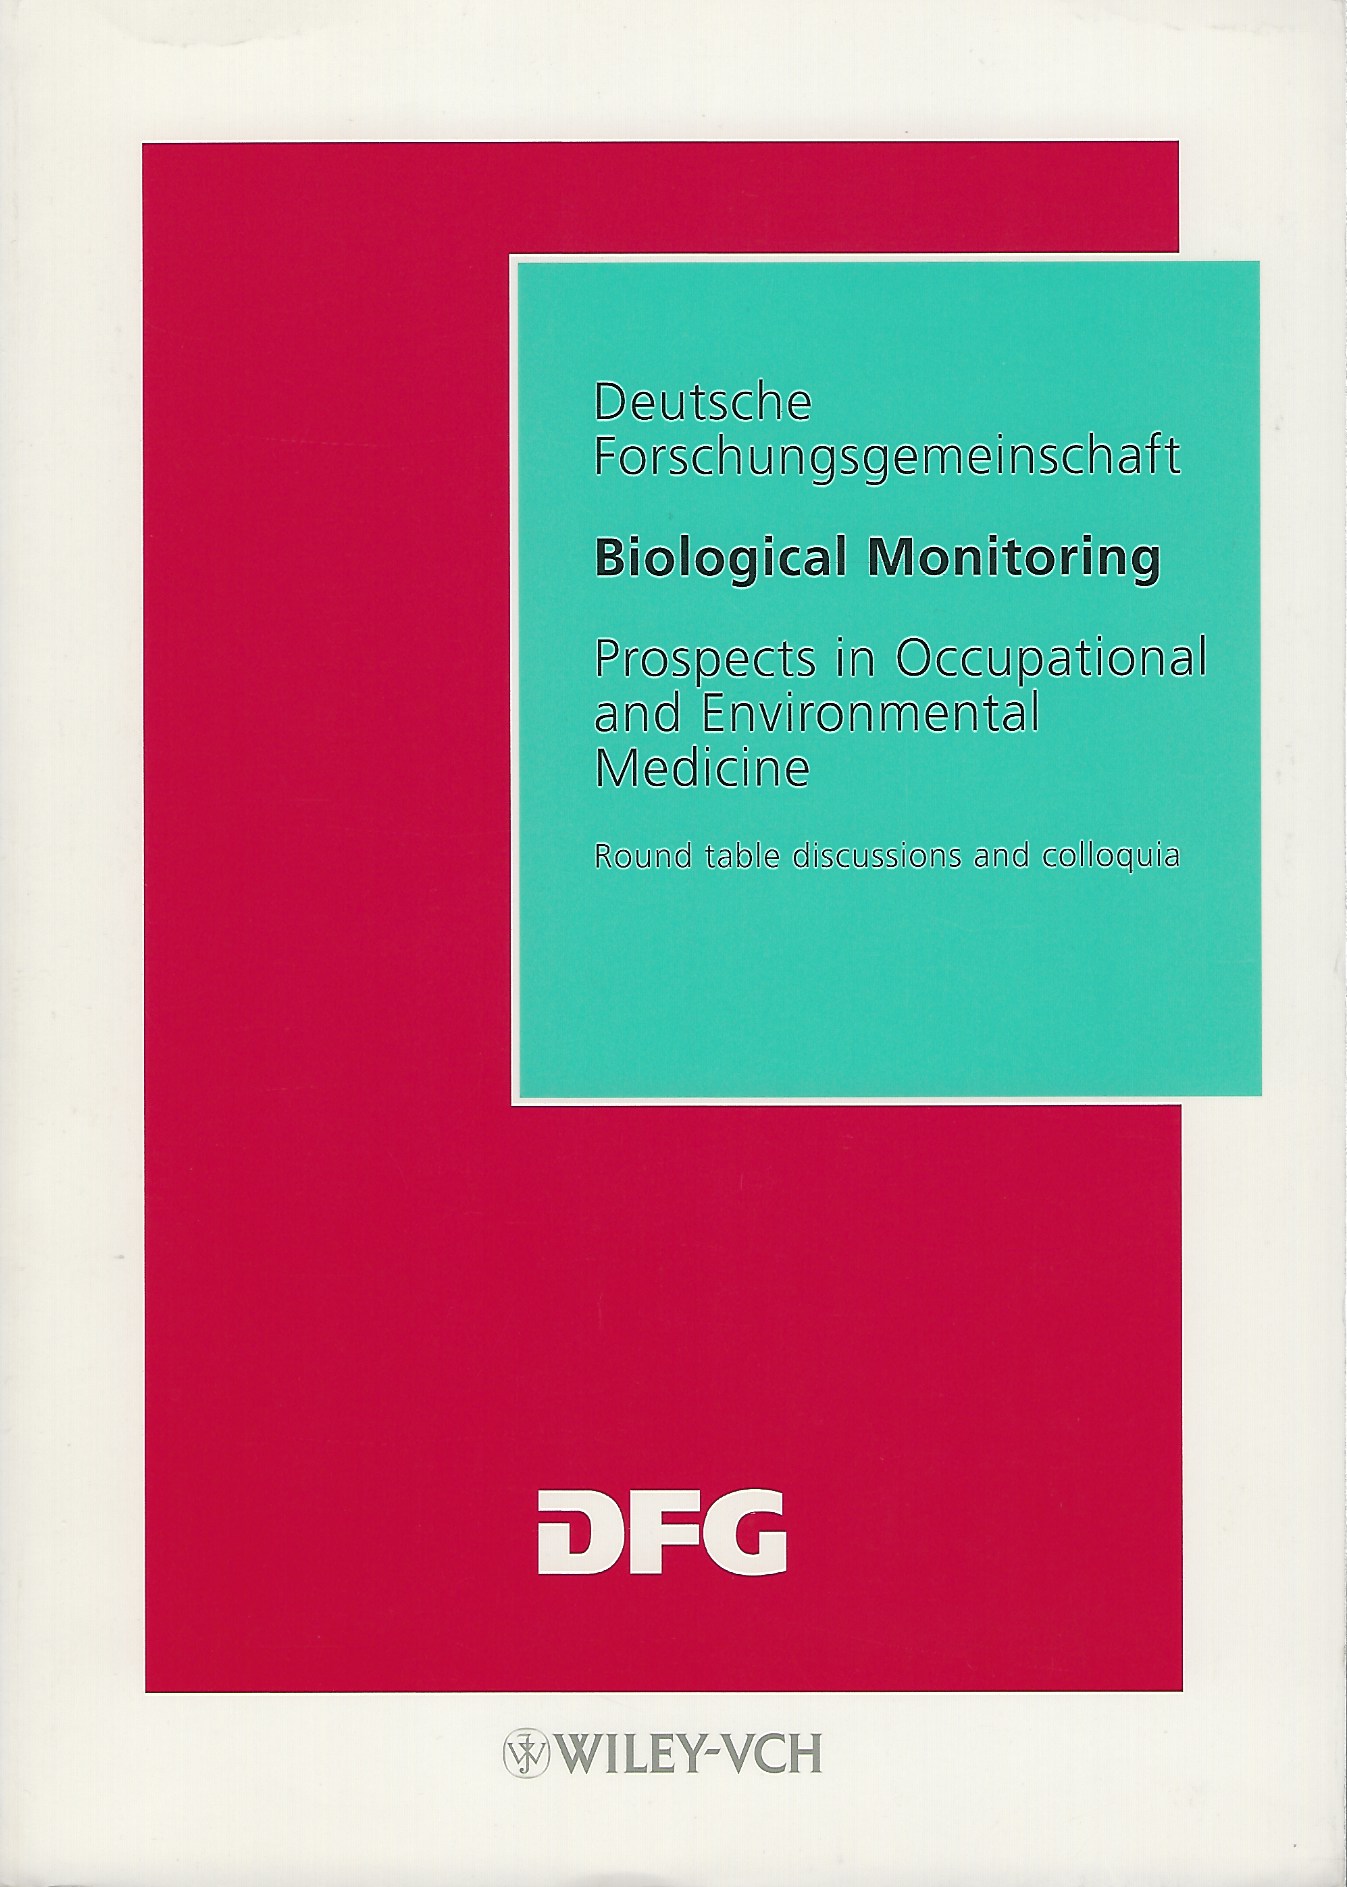 Image for Biological Monitoring. Deutsche Forschungsgemeinschaft. Prospects in Occupational and Environmental Medicine - round tables discussiona and colloquia